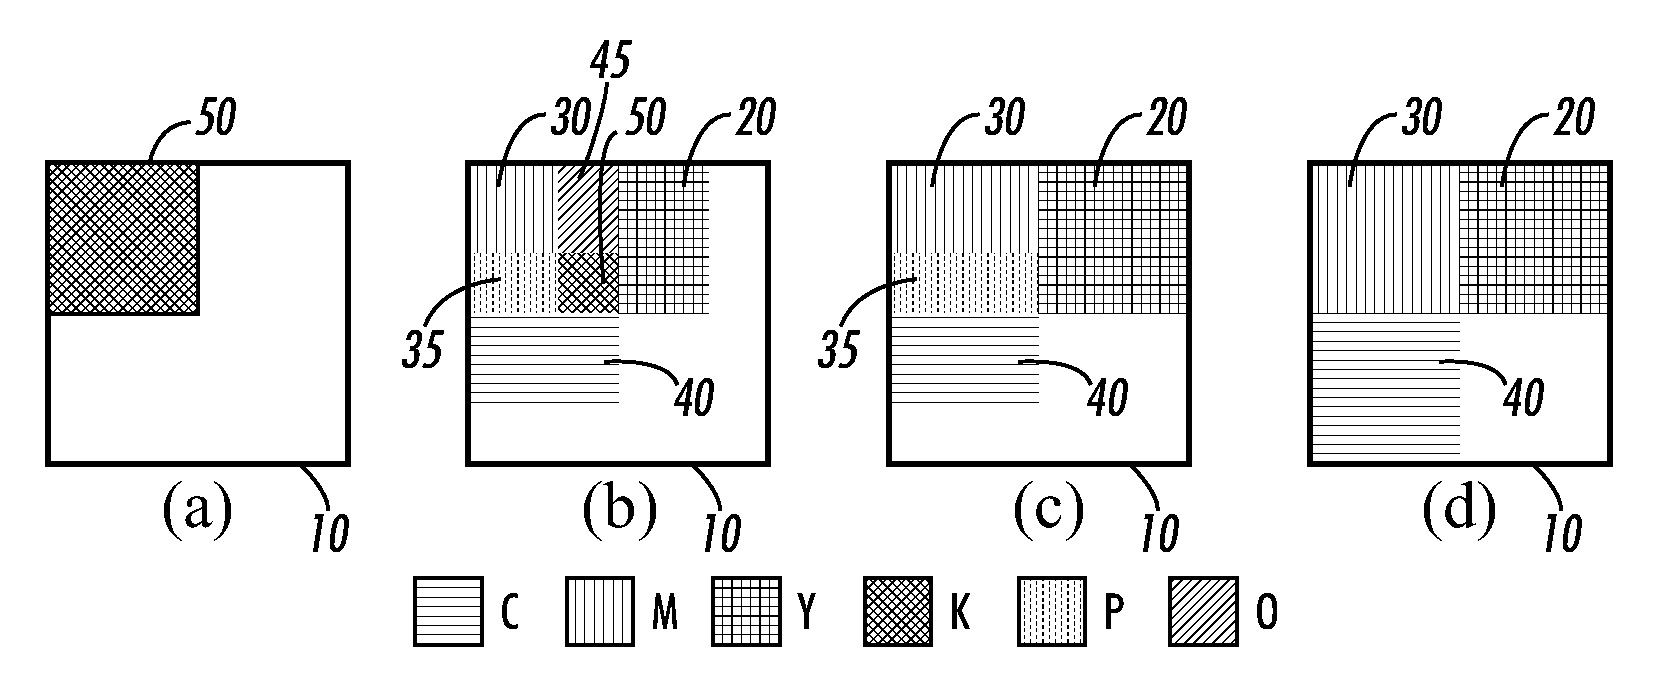 Infrared encoding of security elements using standard xerographic materials with distraction patterns